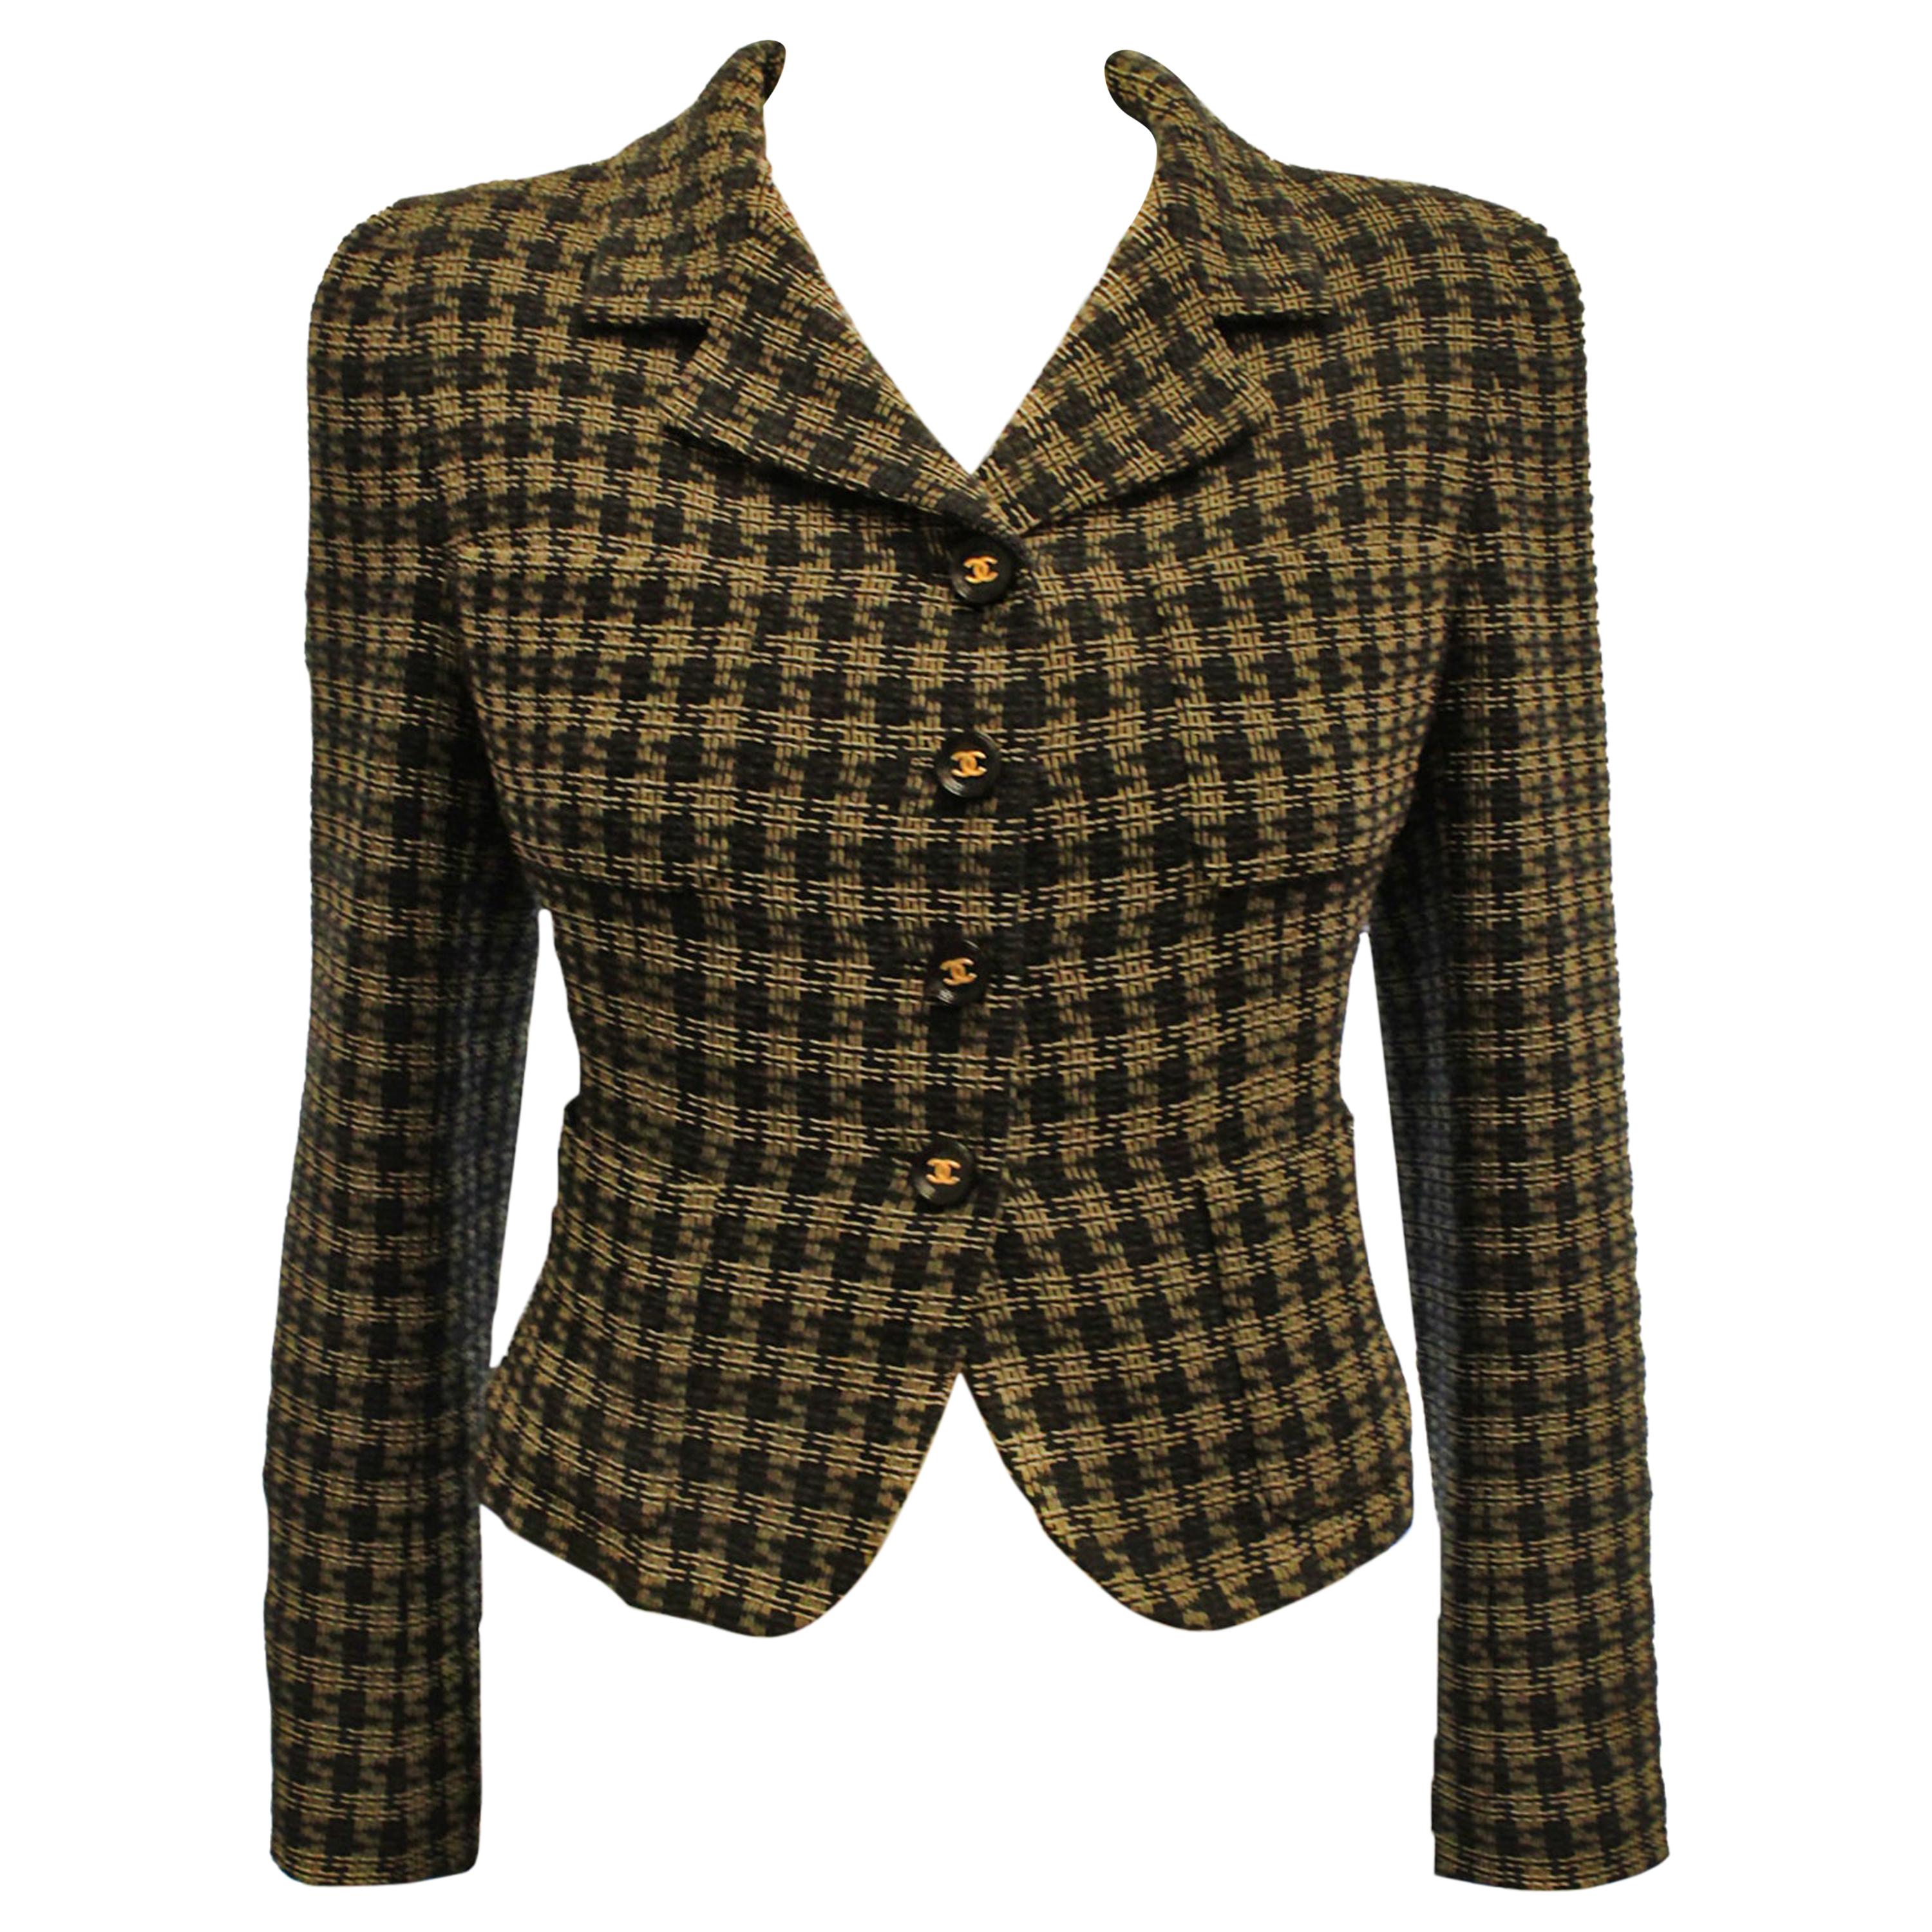 Chanel Black and Gold Tone Check Cropped Jacket